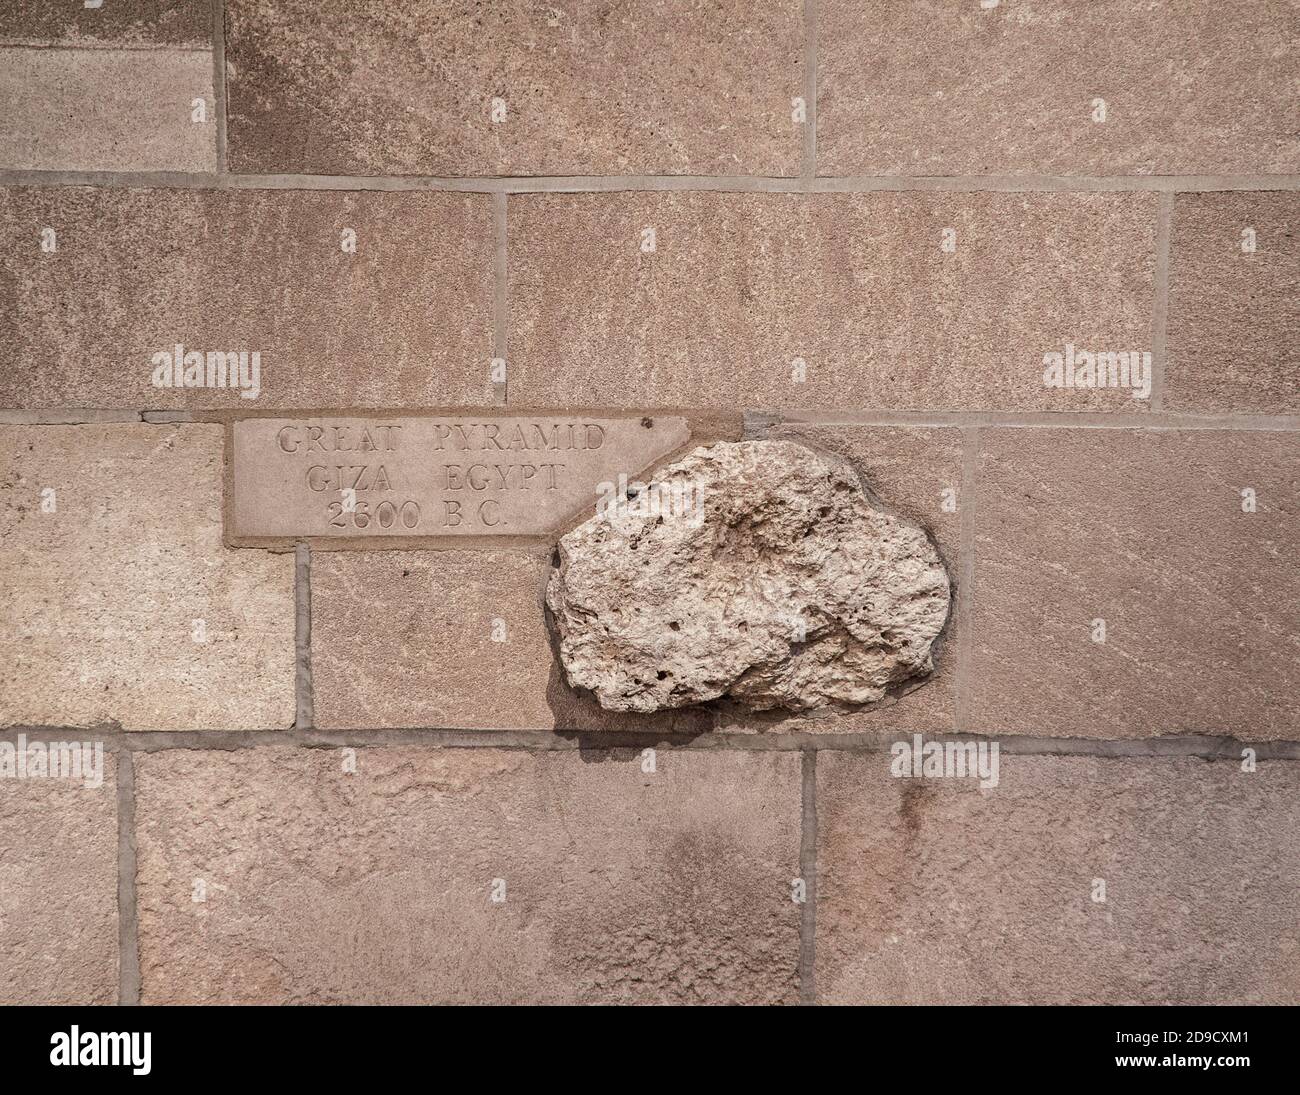 Rock from the Great Pyramid of Giza, Egypt encrusted into the wall of the Tribune Tower Building in Chicago, Illinois, USA Stock Photo